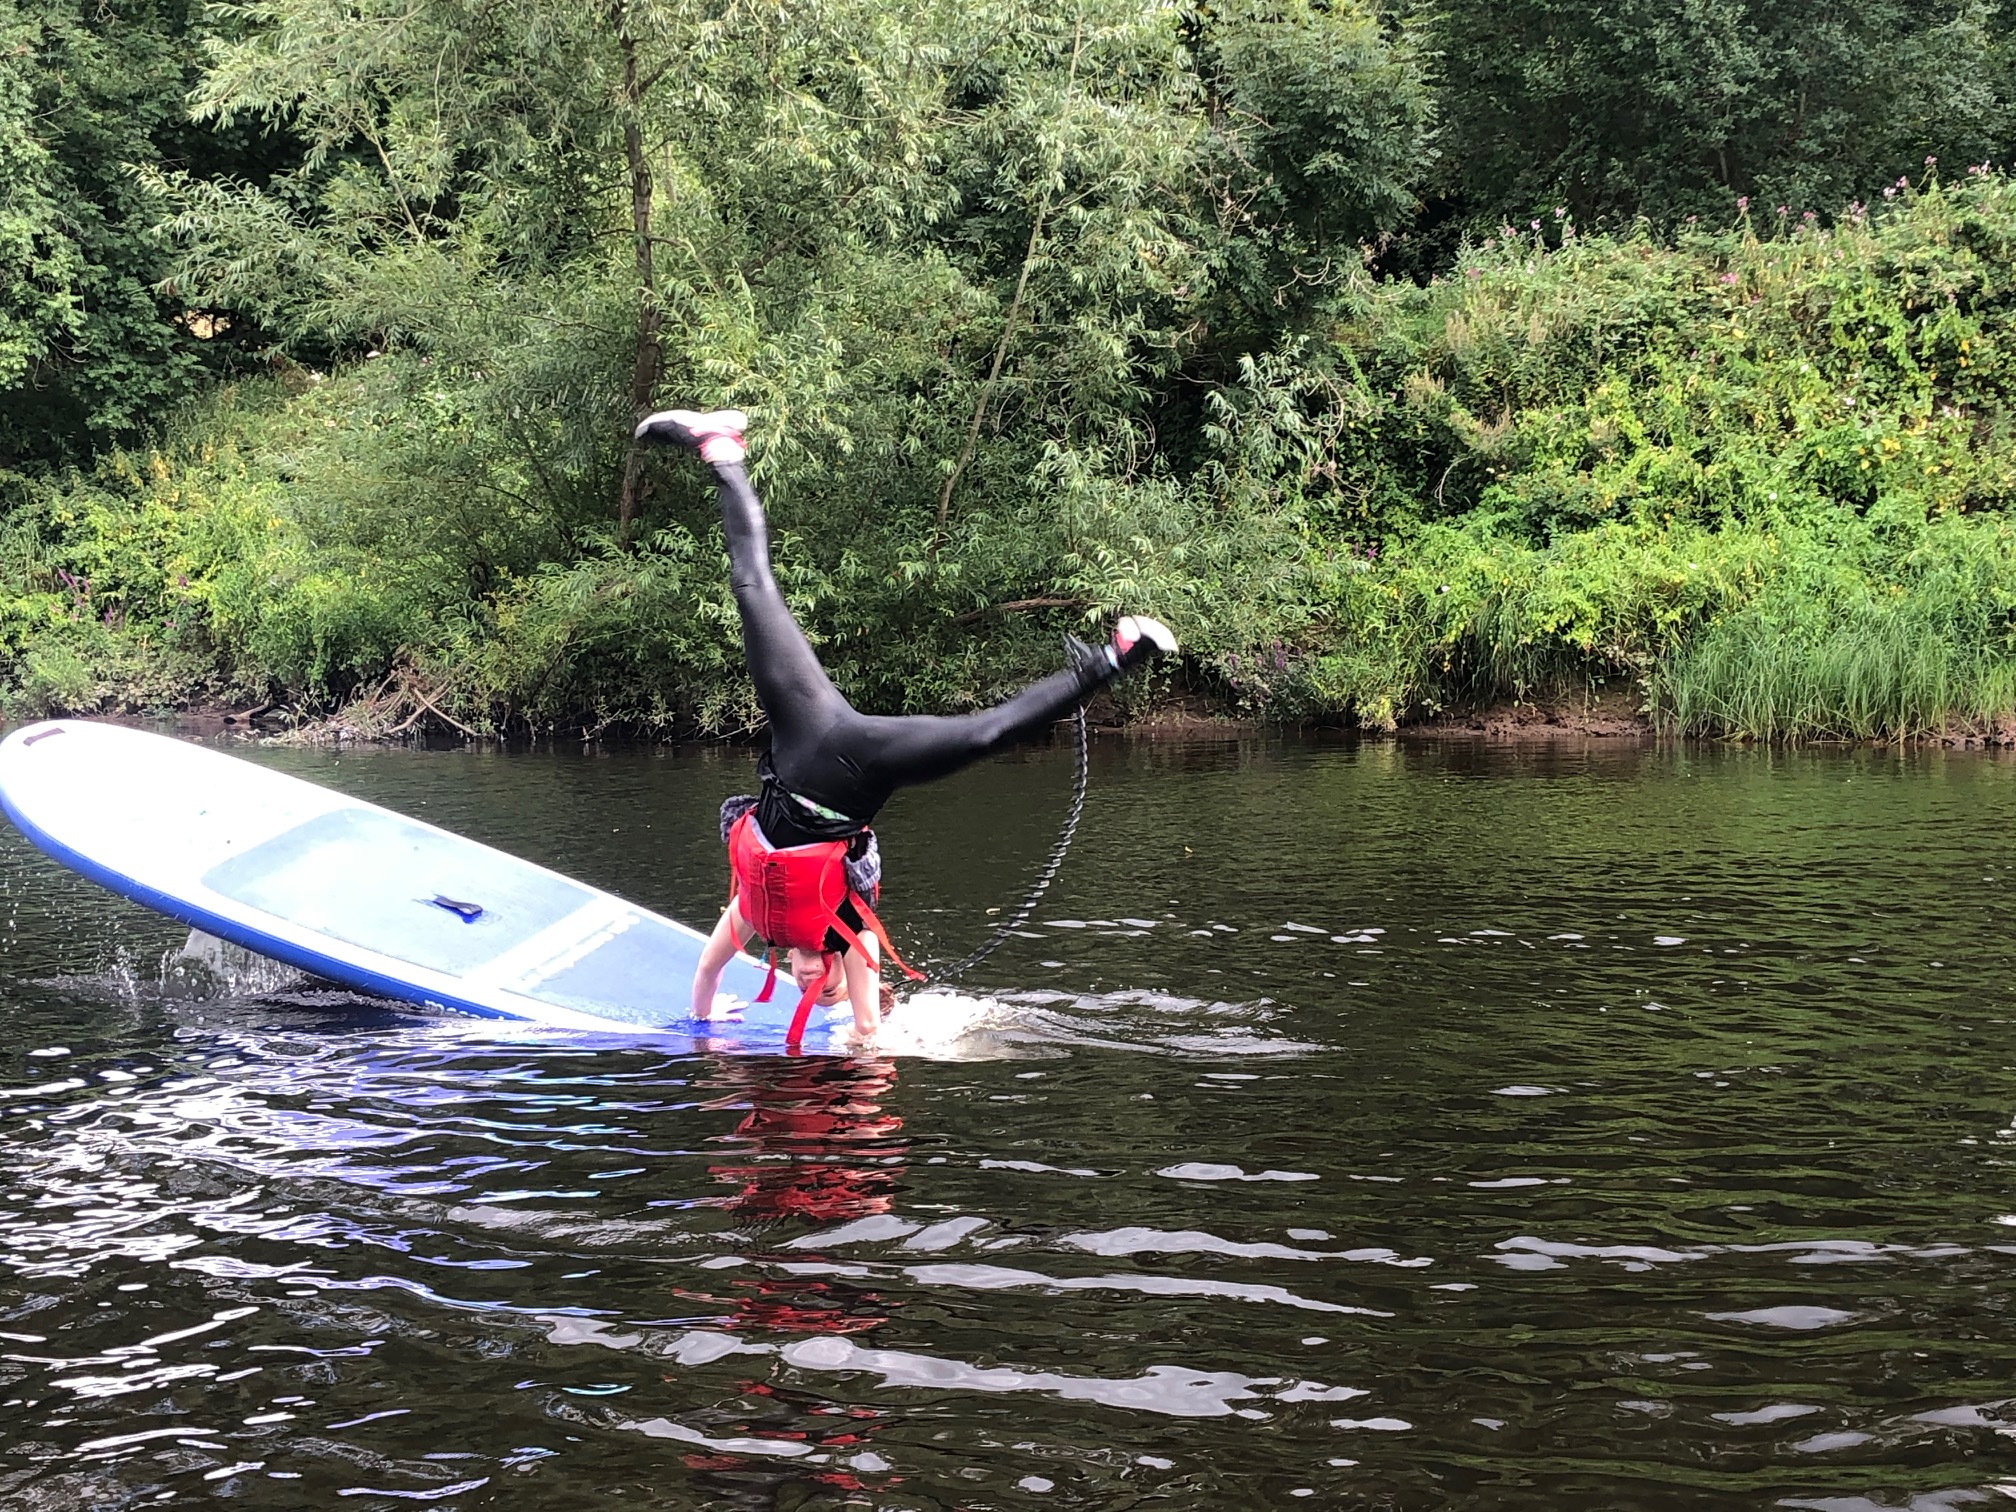 Fun Stand-up paddle boarding (SUP) on The River Wye at Monmouth with Inspire2Adventure